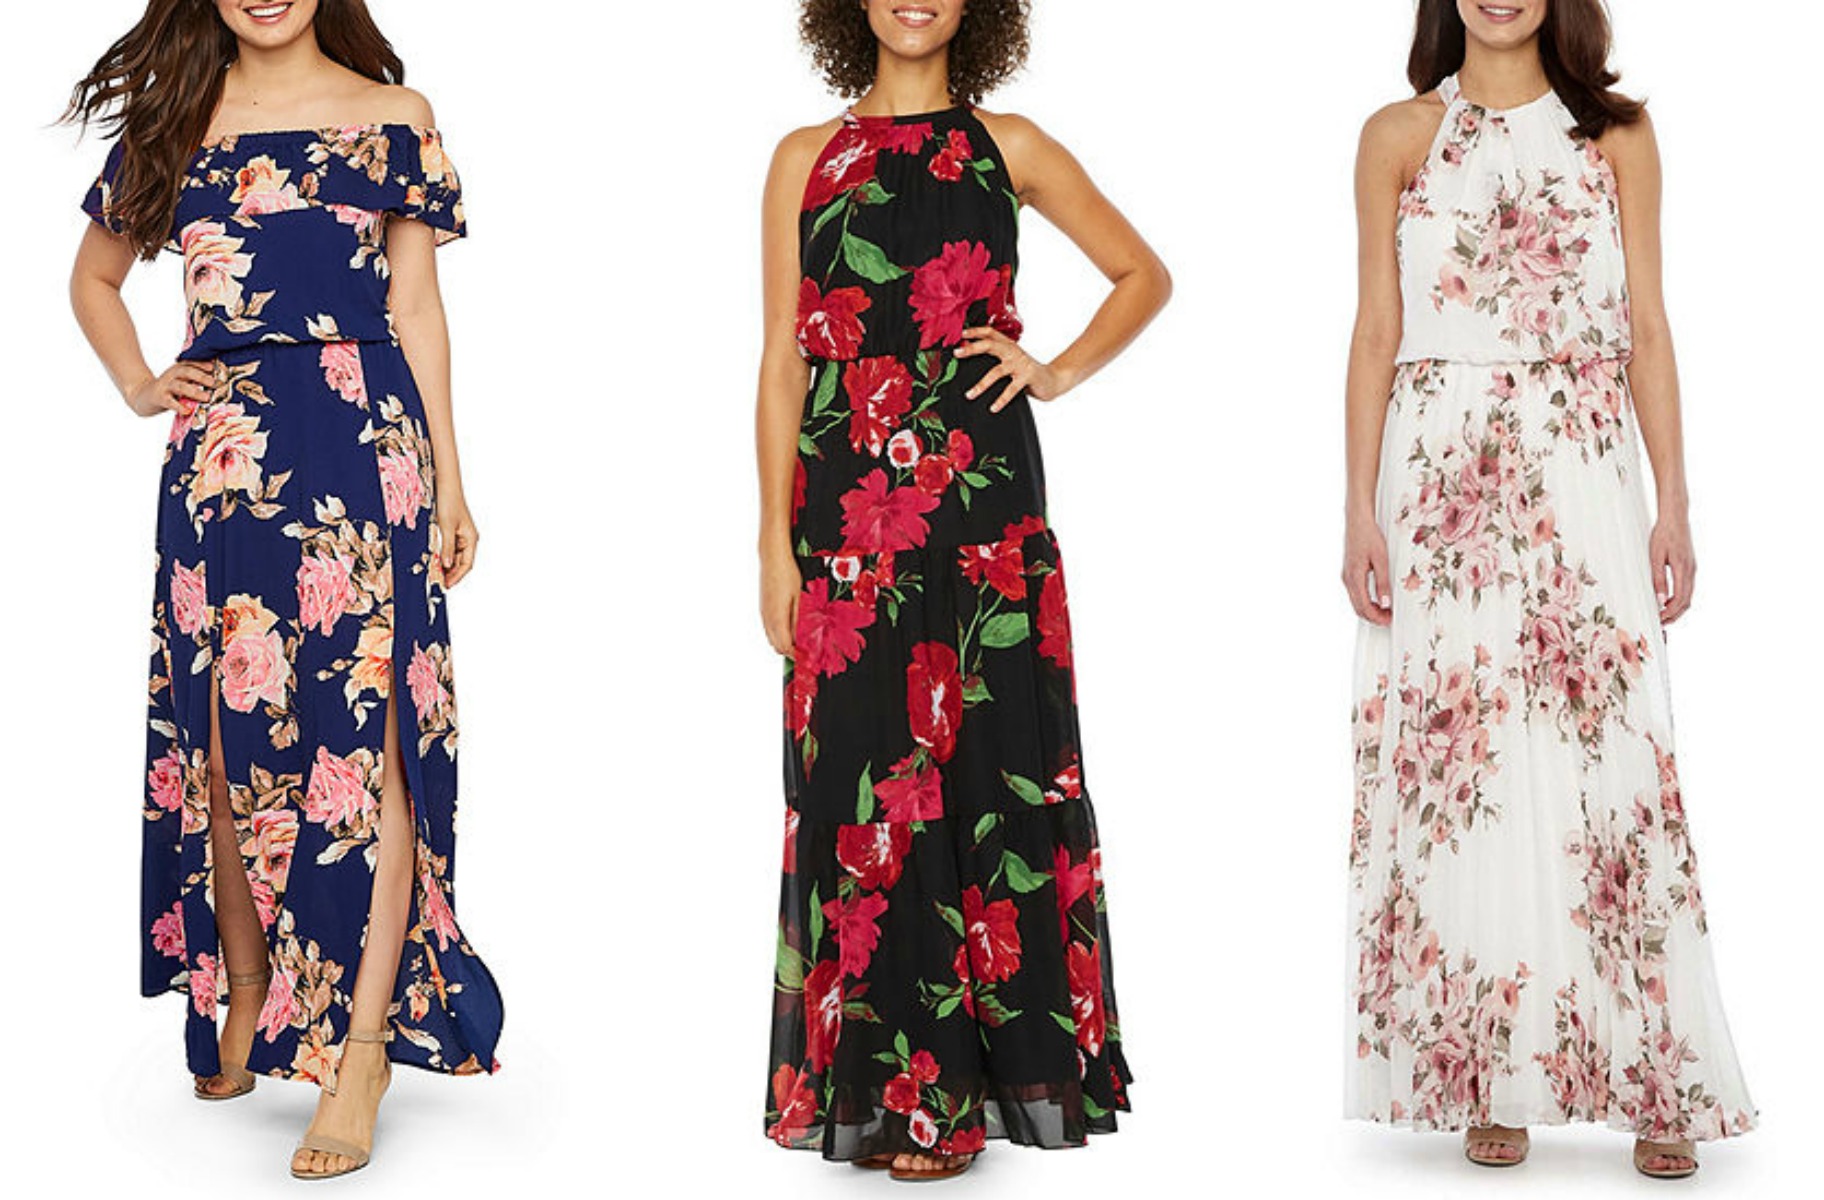 Jcpenney Spring Dresses 2019 Clearance ...